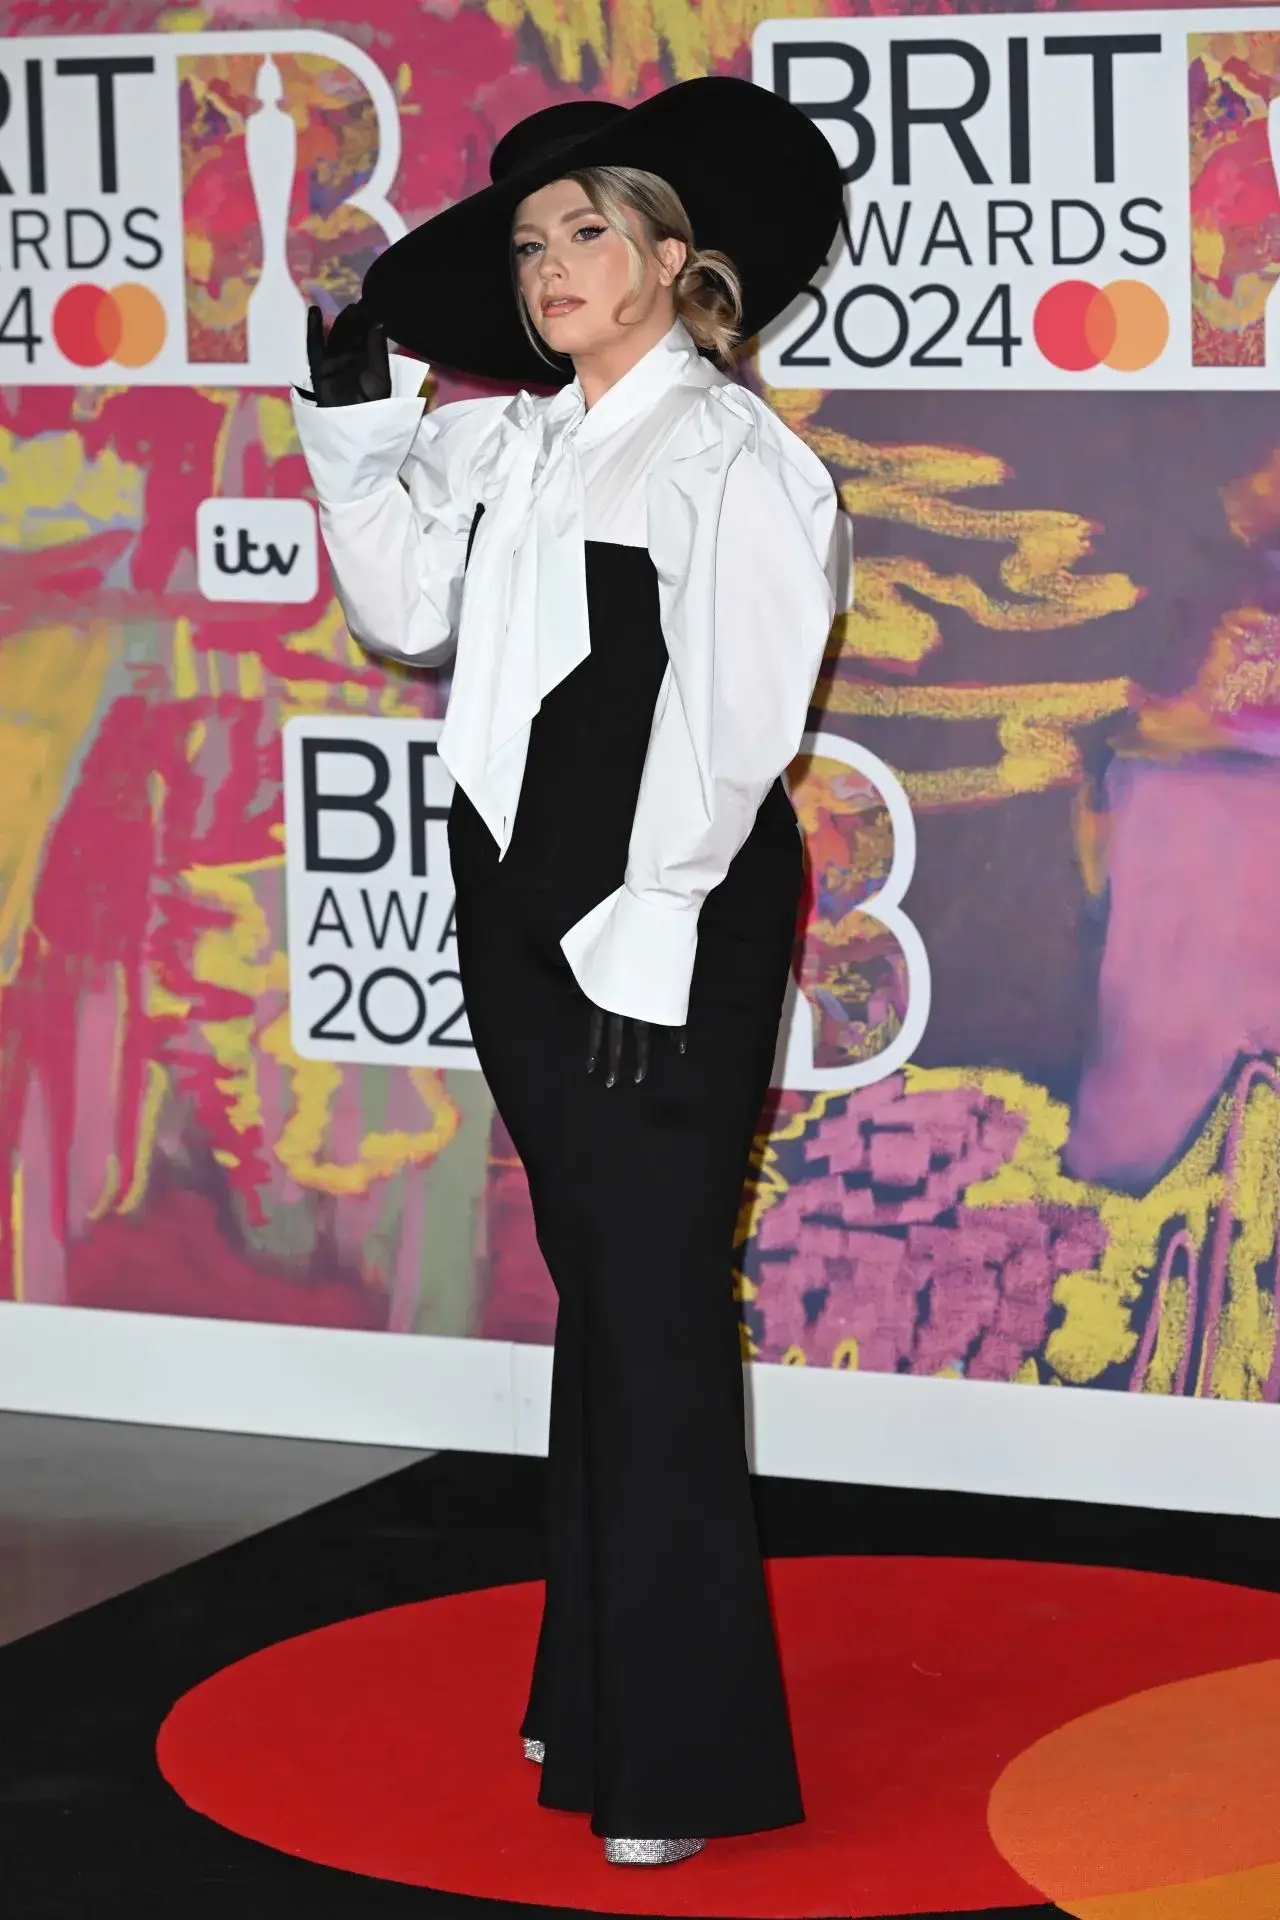 ELLA HENDERSON PHOTOSHOOT AT THE BRIT AWARDS 2024 IN LONDON 2